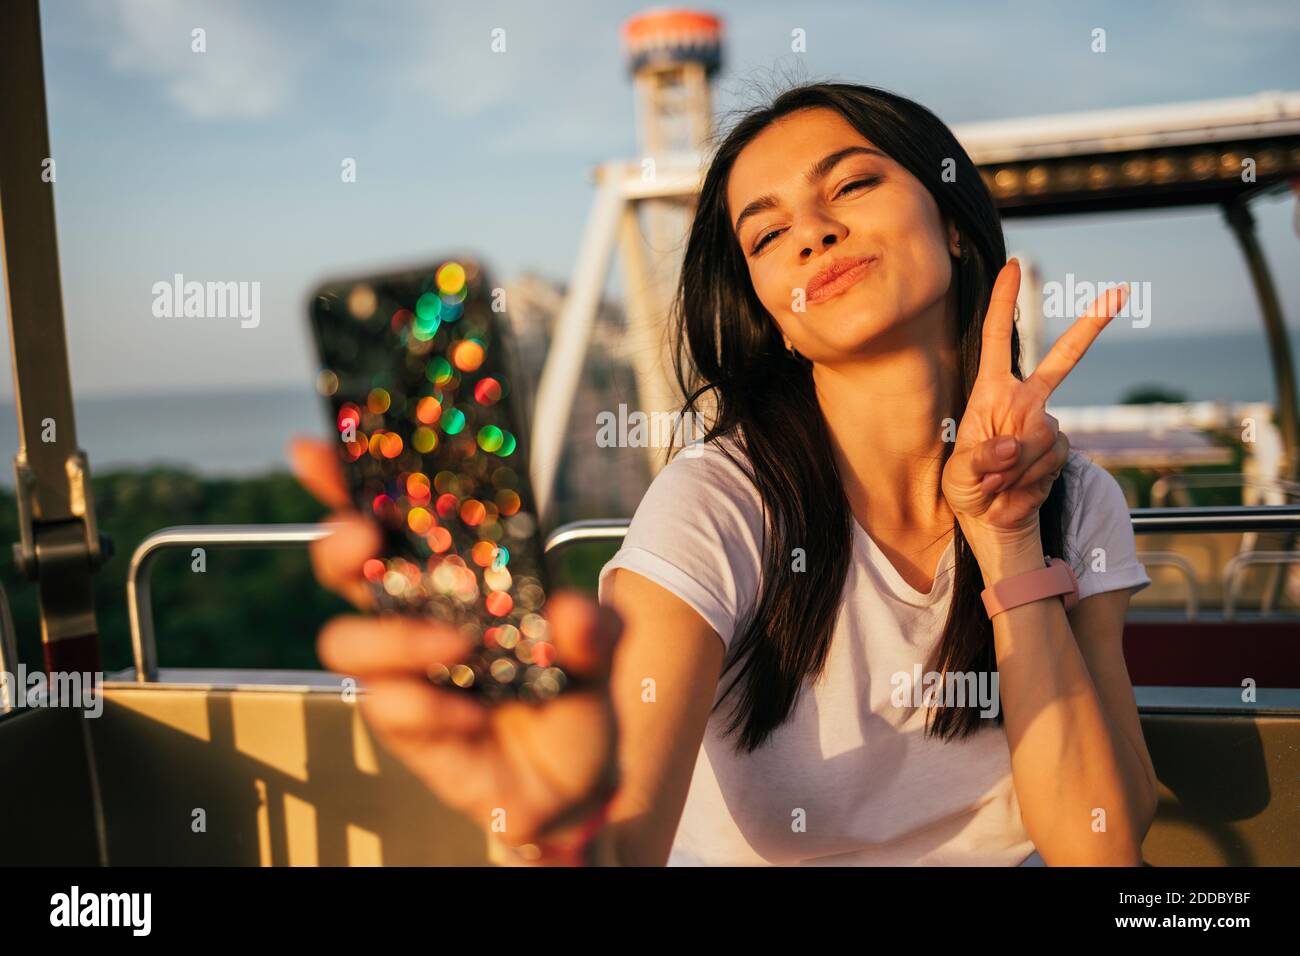 Beautiful young woman taking selfie through mobile phone while puckering and gesturing peace sign on Ferris wheel Stock Photo